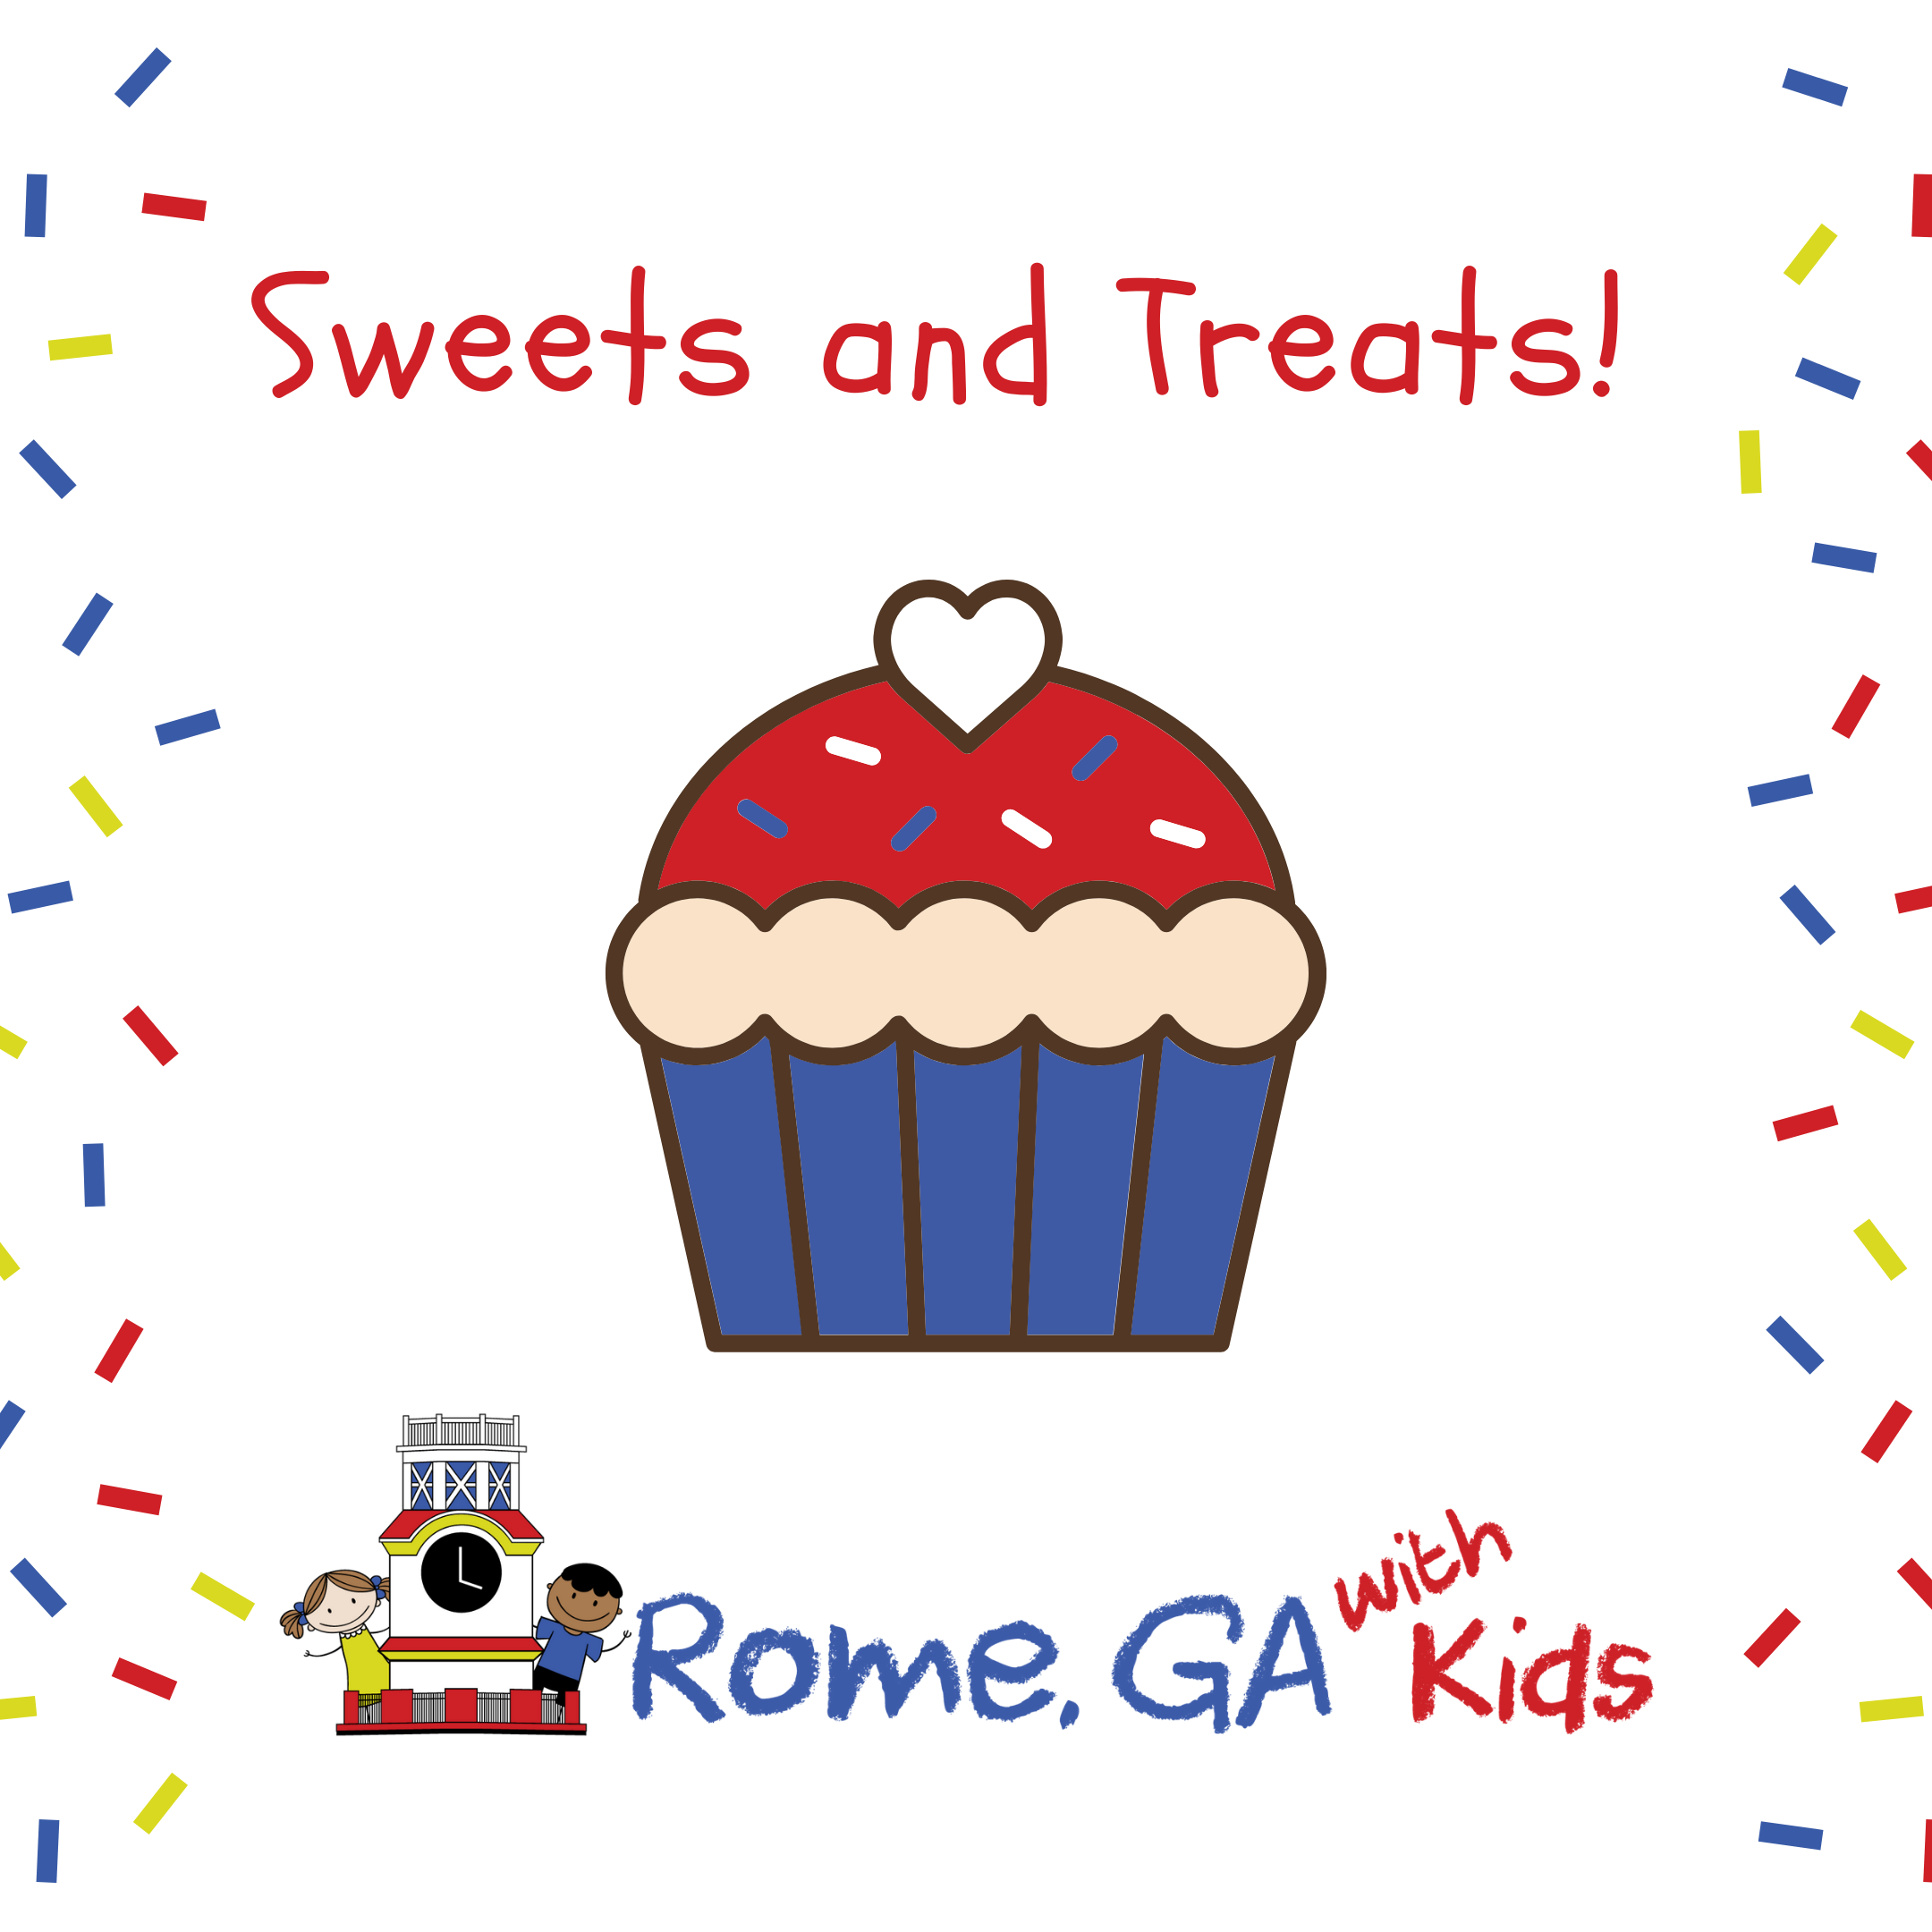 header image that says sweets and treats